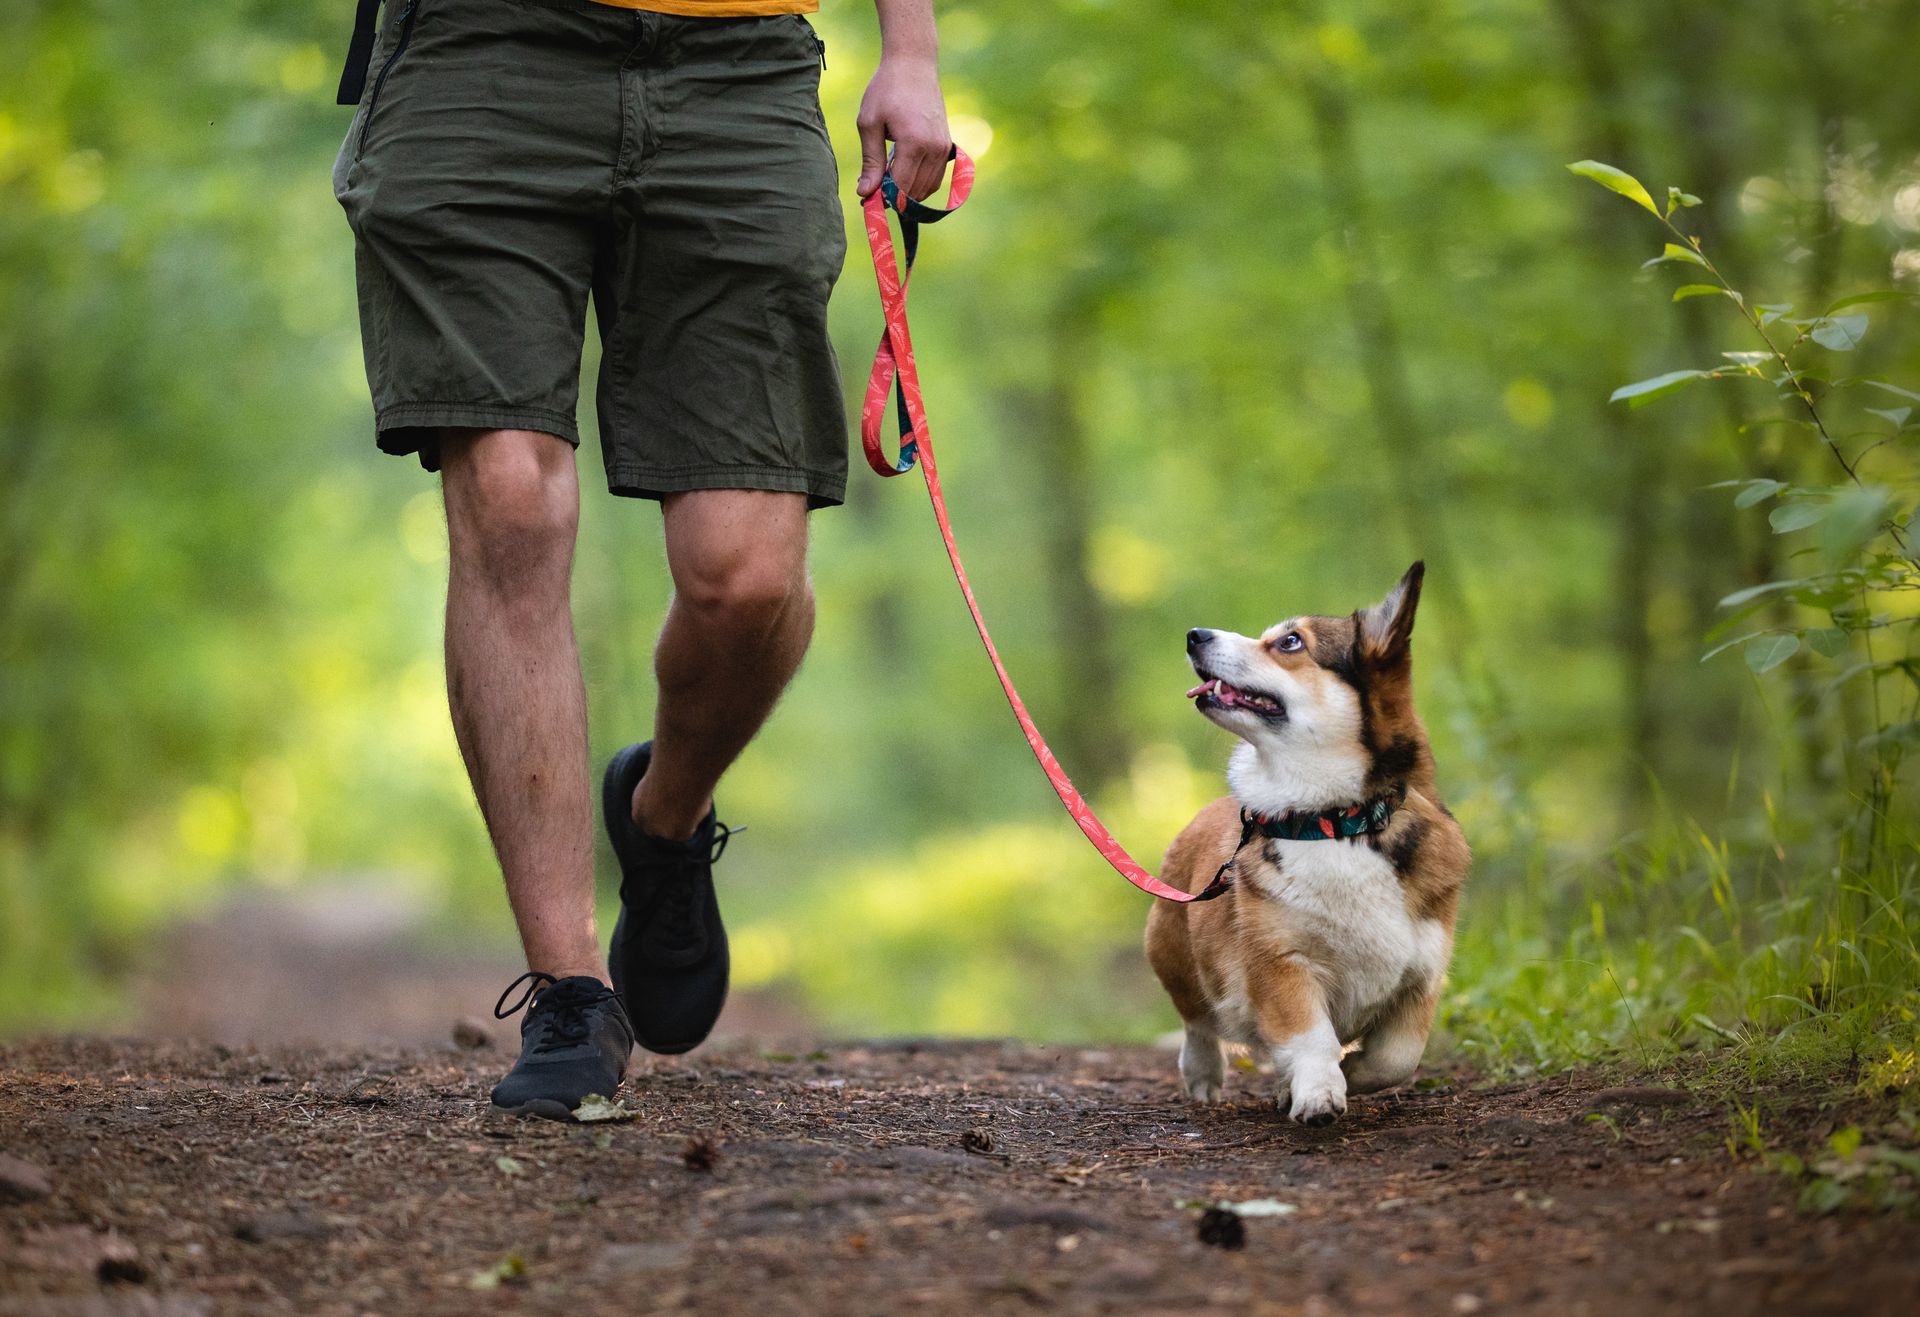 Explore essential tips for walking your dog safely. From leash training to
treats, ensure a secure a